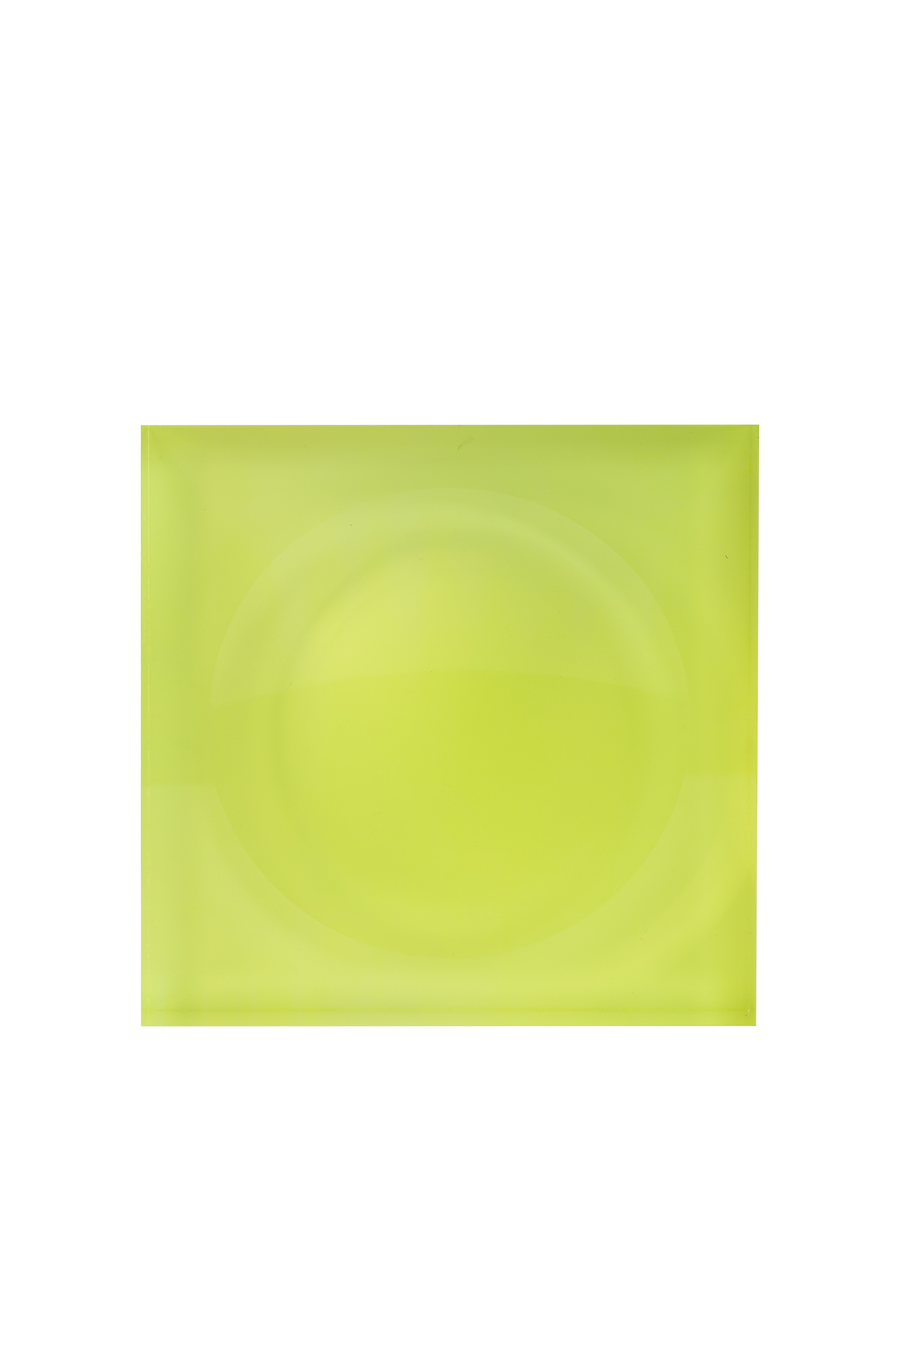 Candy Bowl - Neon Yellow